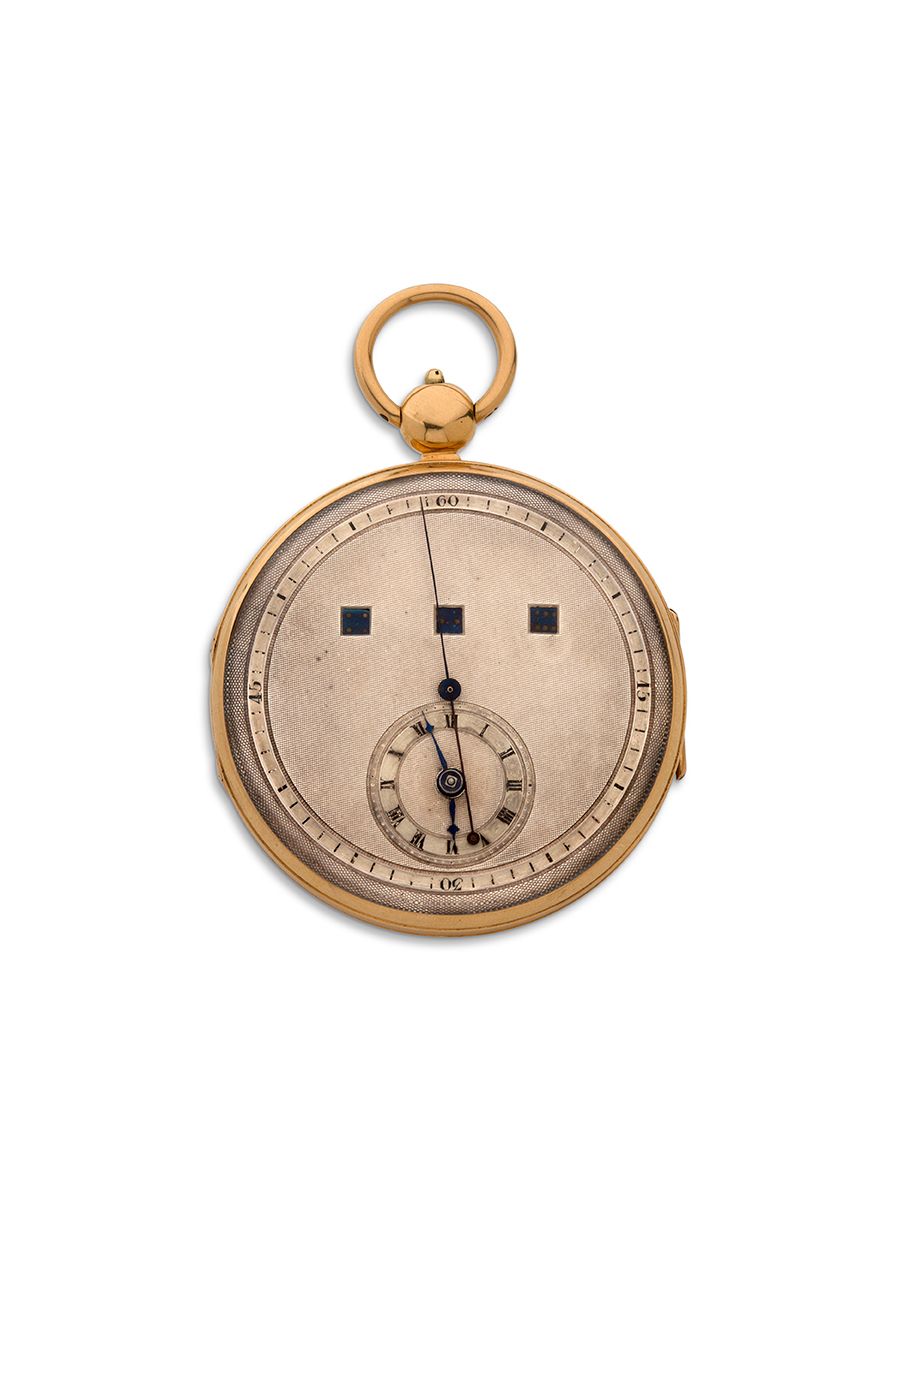 ANONYME 
Gold pocket watch with regulator dial, center seconds and apertures for&hellip;